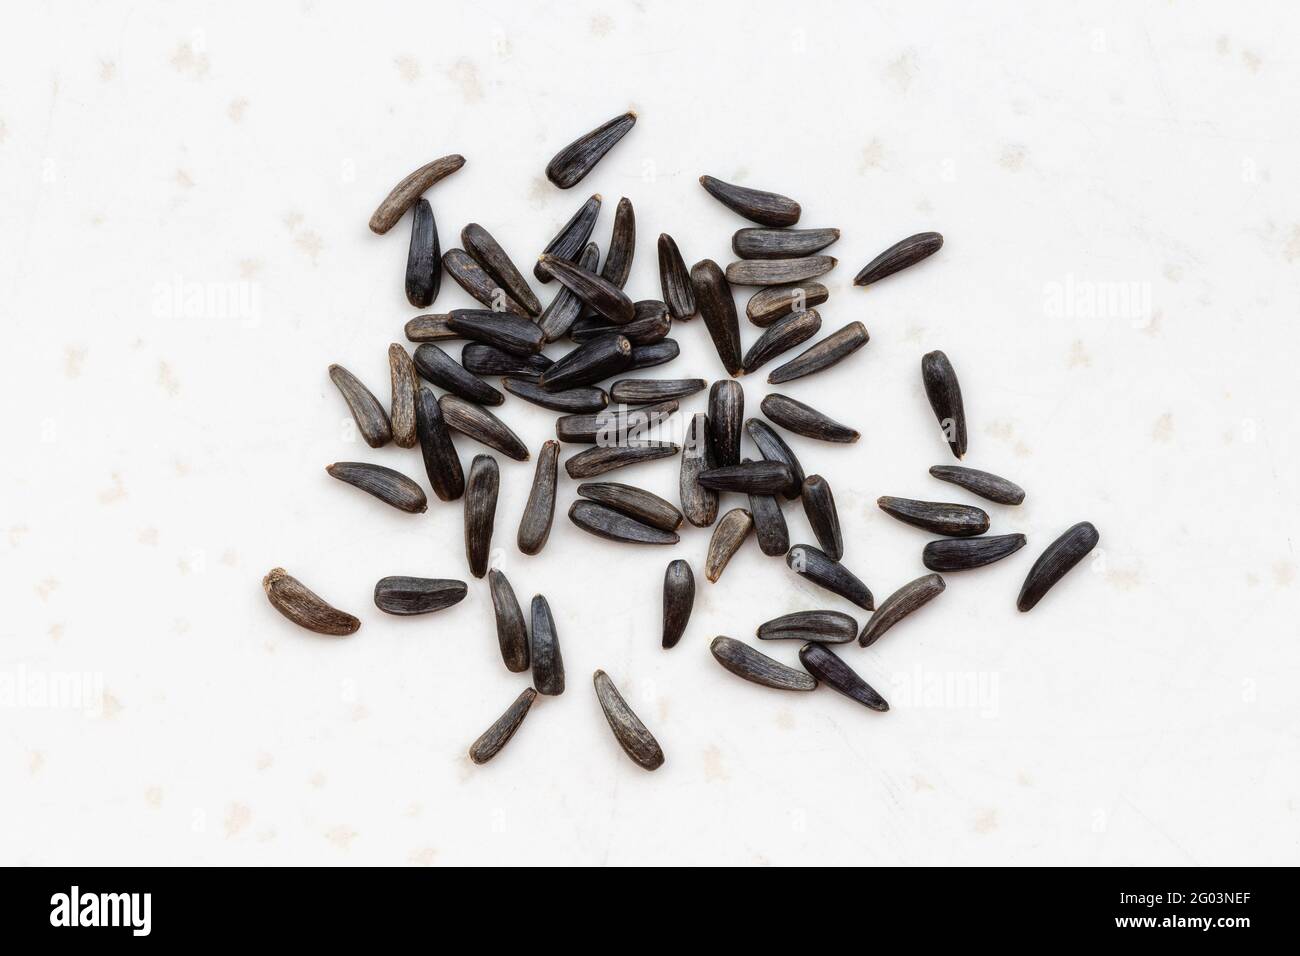 several whole-grain niger seeds (Guizotia Abyssinica) close up on gray ceramic plate Stock Photo